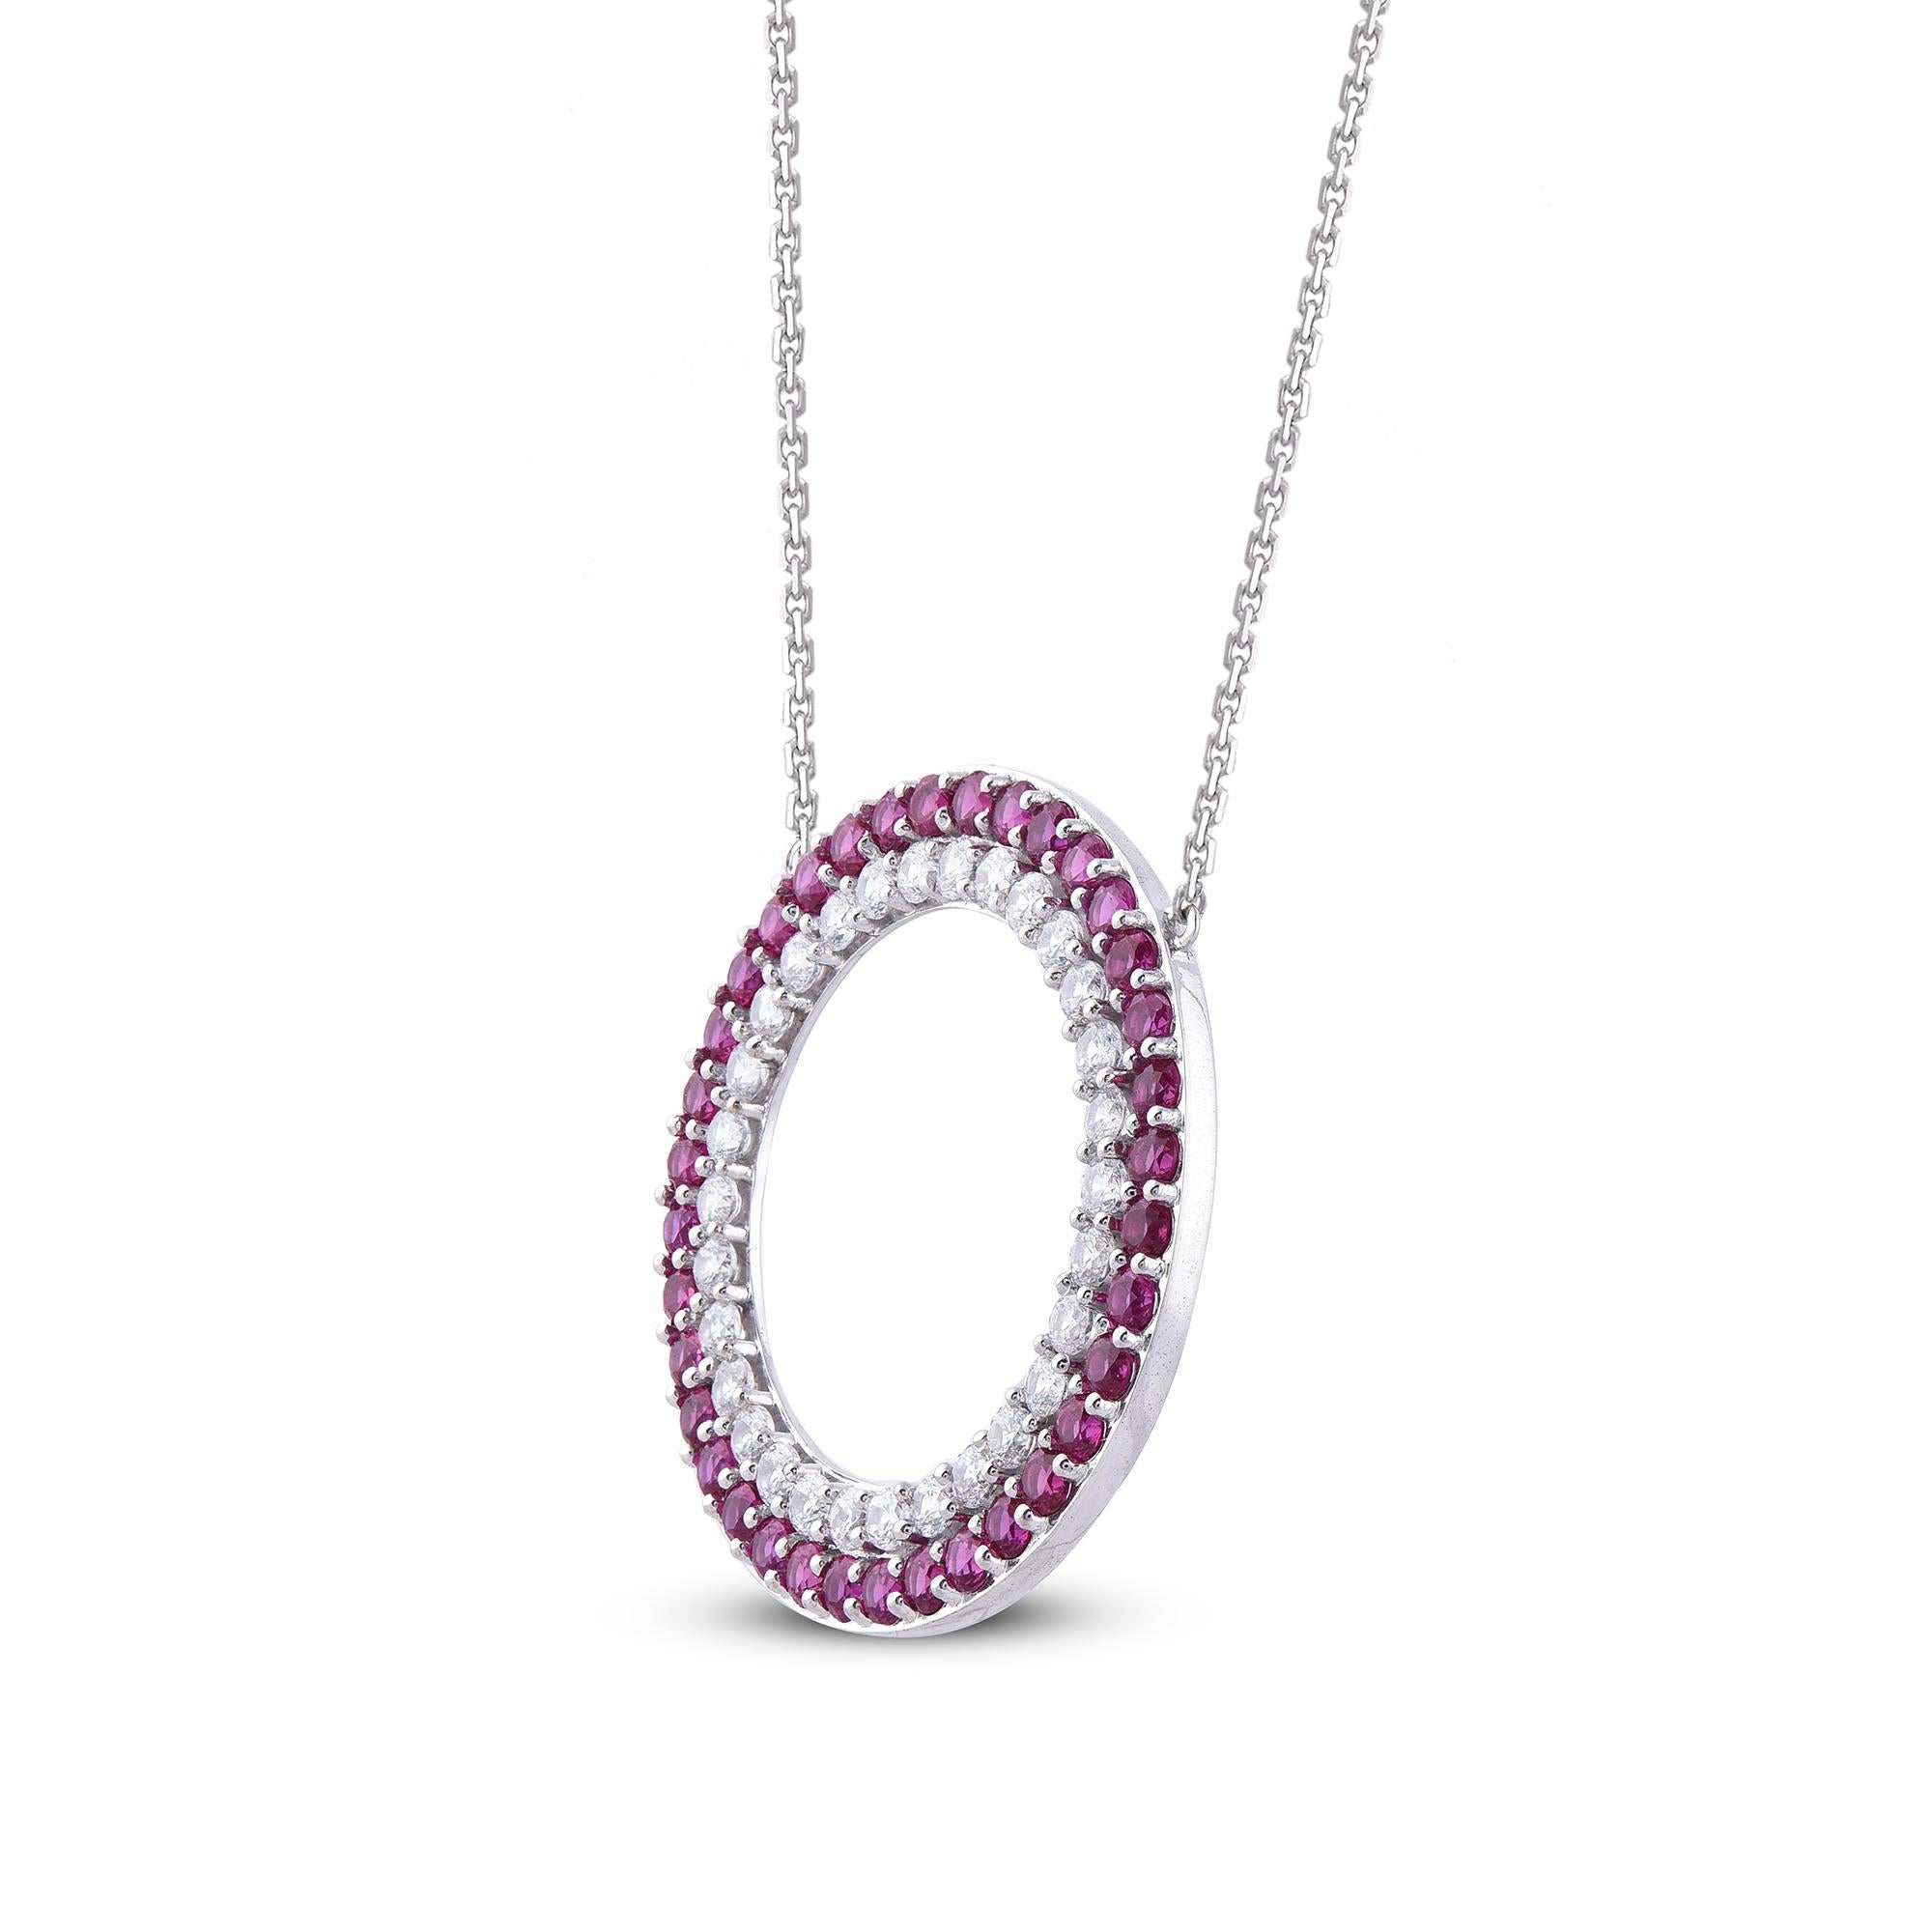 A striking addition when worn on its own, this diamond pendant makes a stunning impression. The pendant is crafted from 14 karat white gold and features 30 white diamond and 36 ruby gemstone set in prong set, H-I color I2 clarity and a high polish